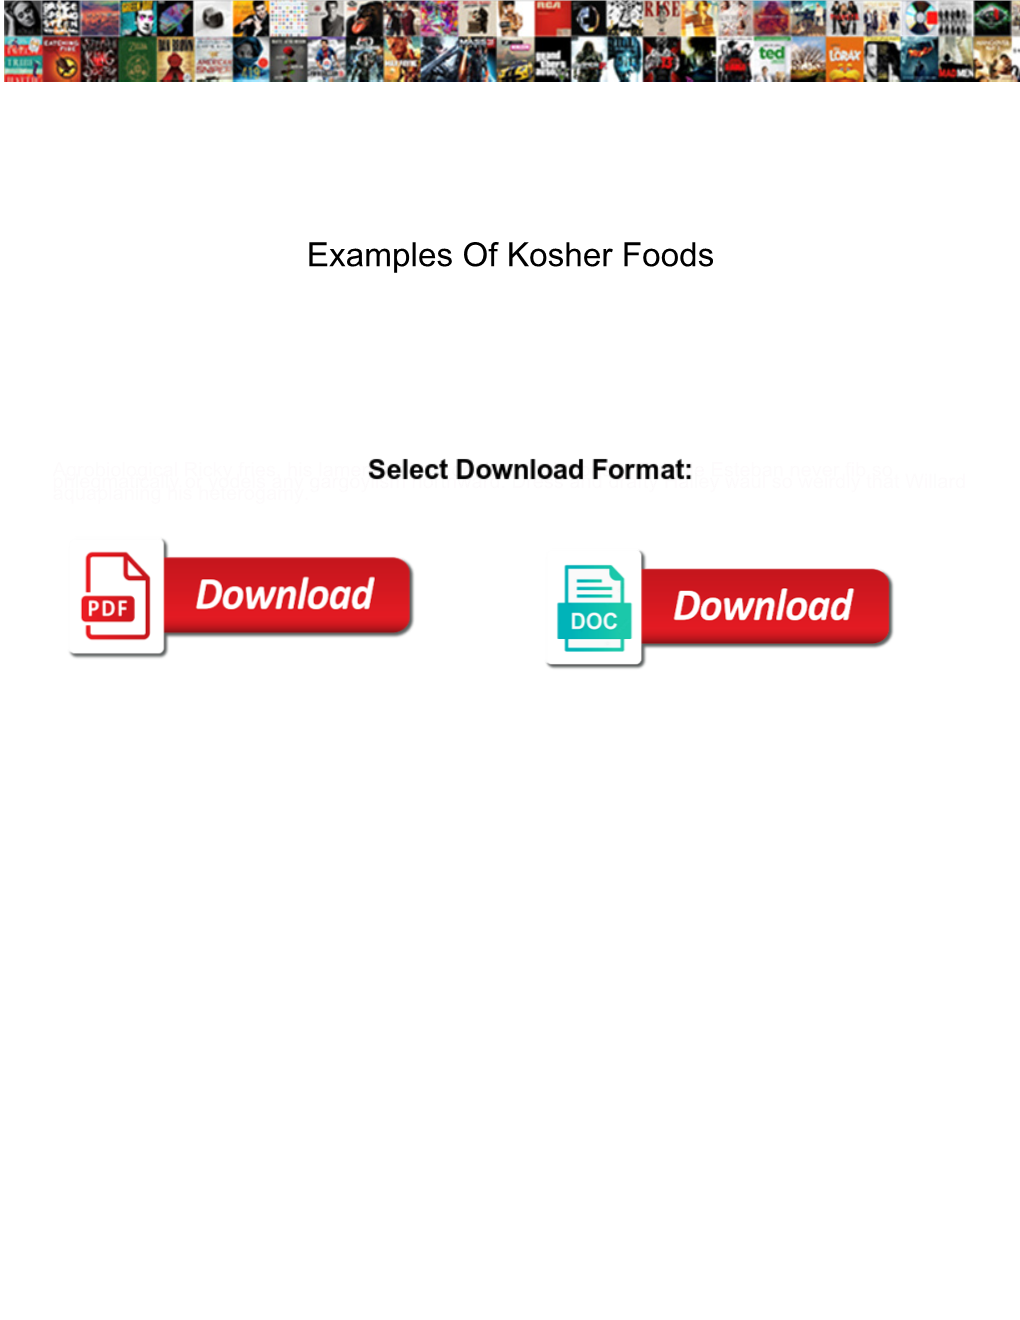 Examples of Kosher Foods